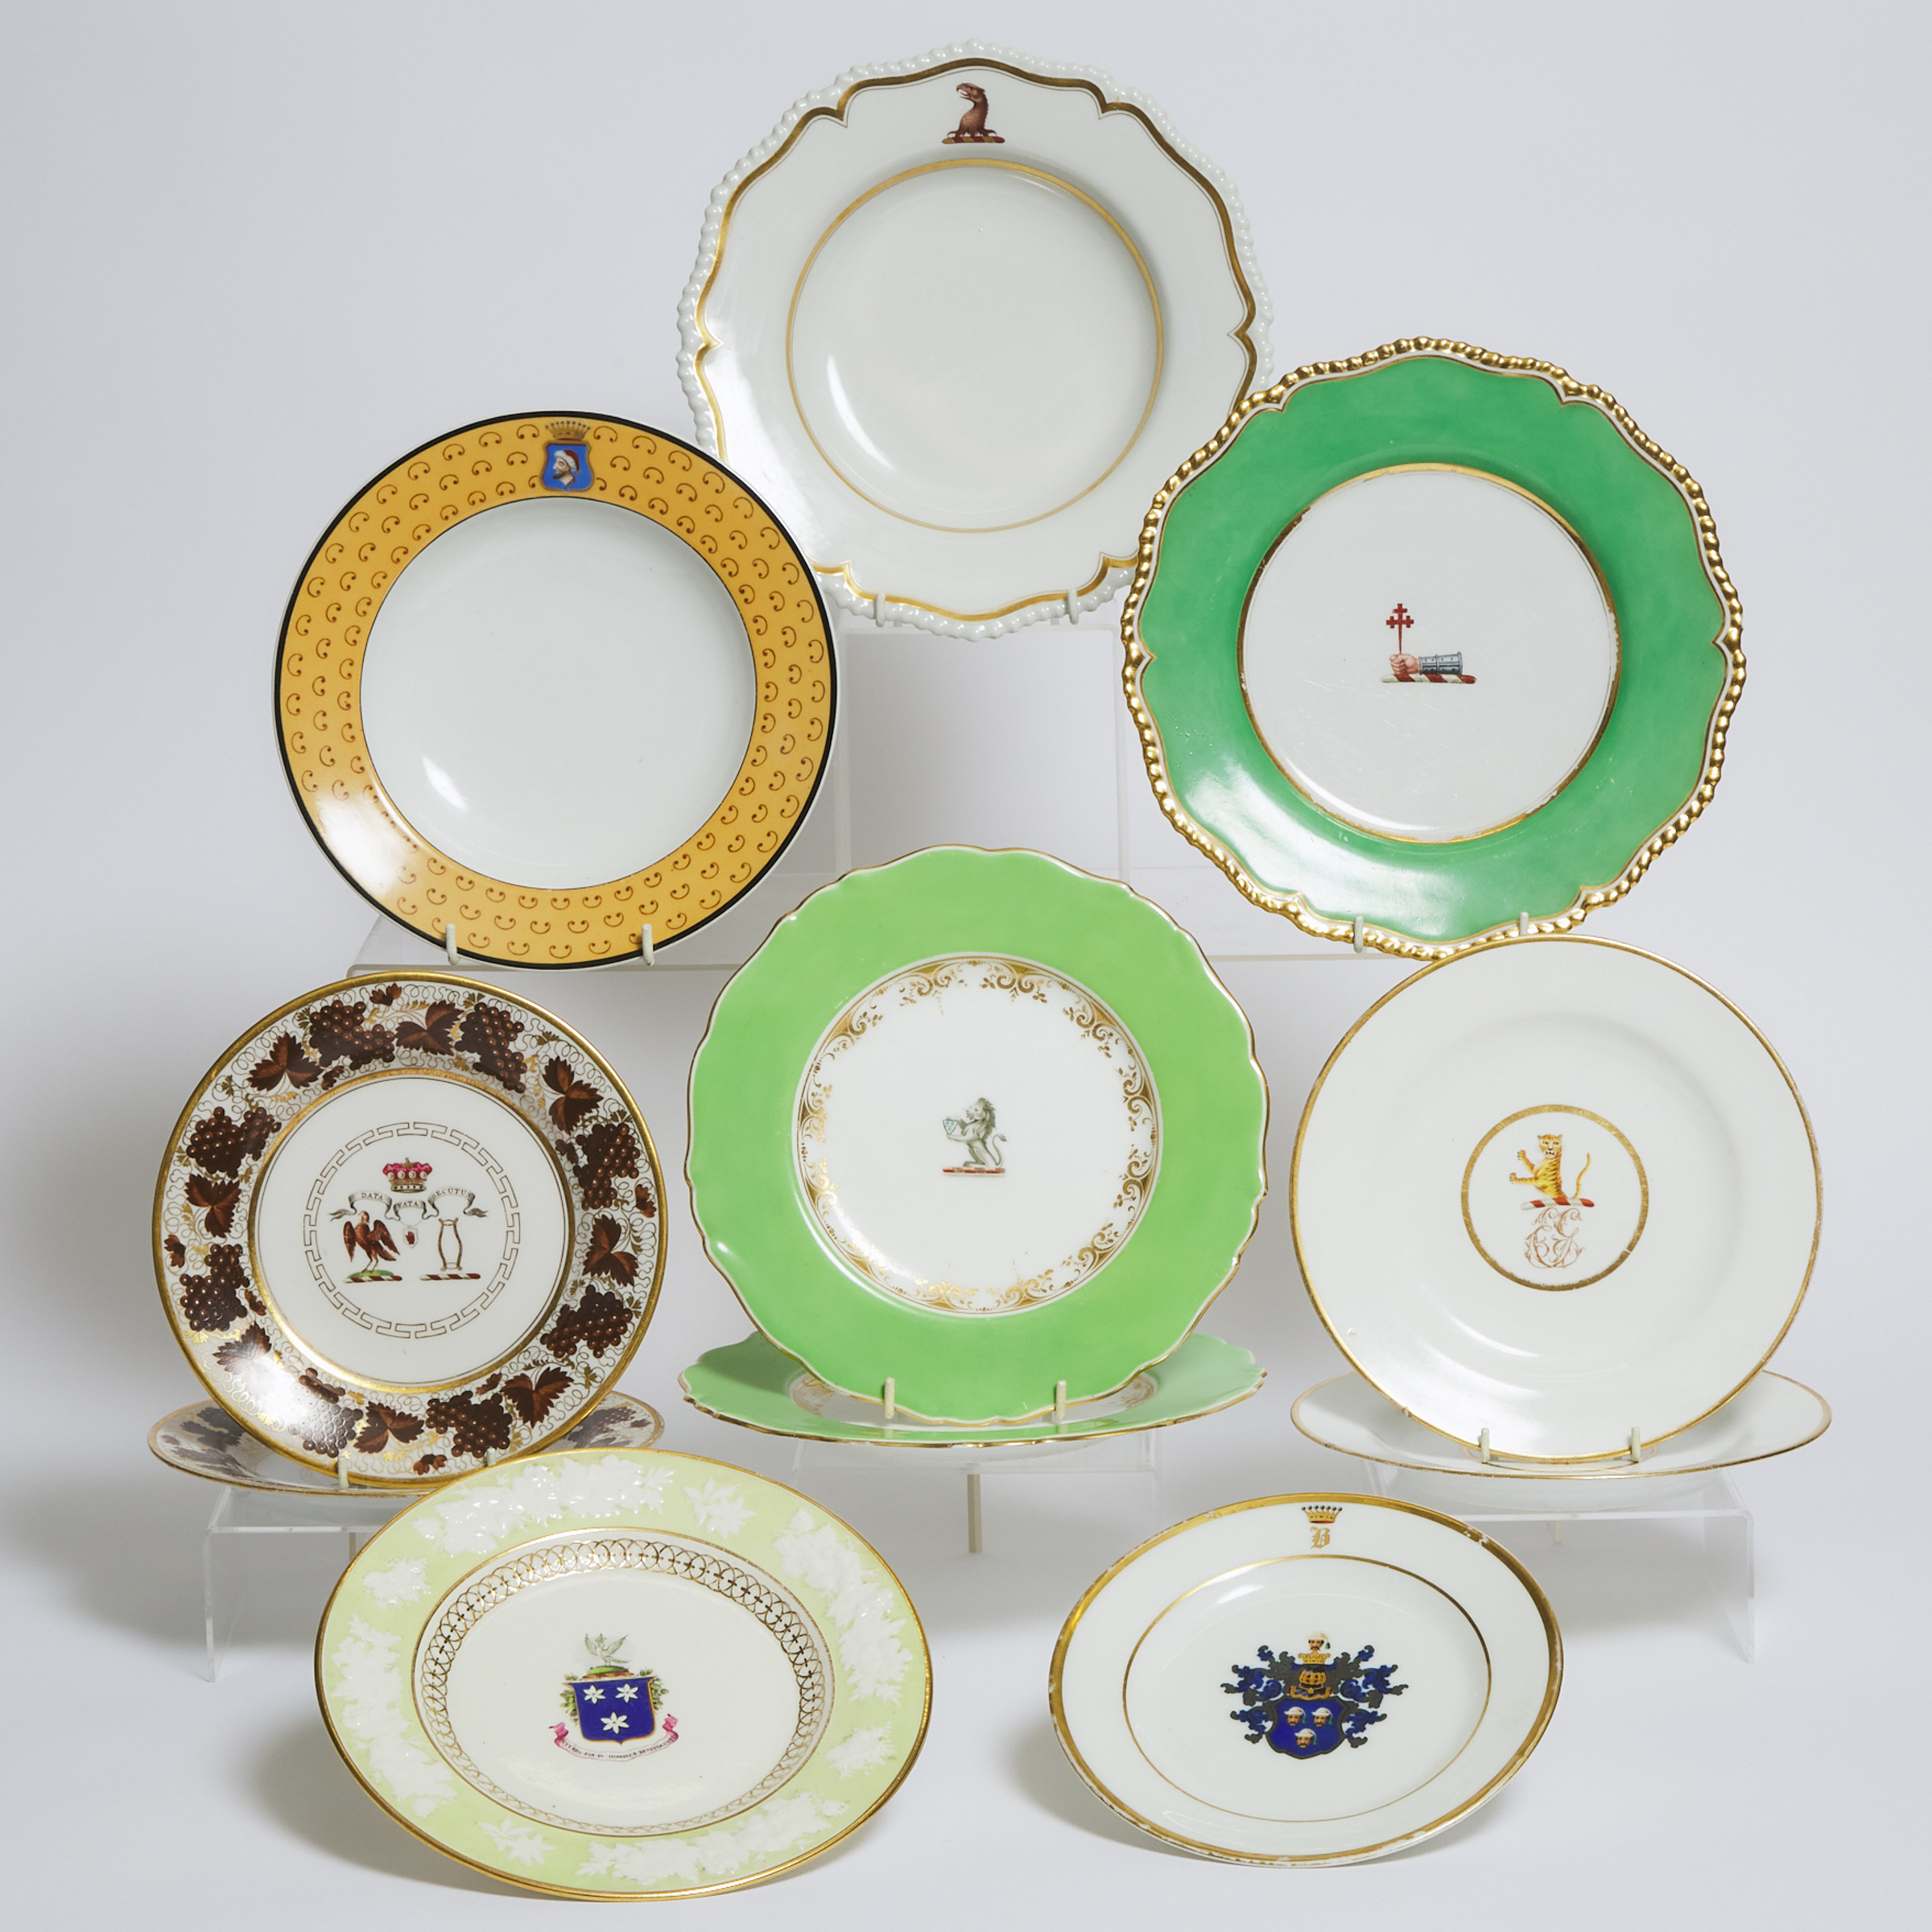 Eleven Various English and Continental Porcelain Armorial or Crest Decorated Plates, 19th century